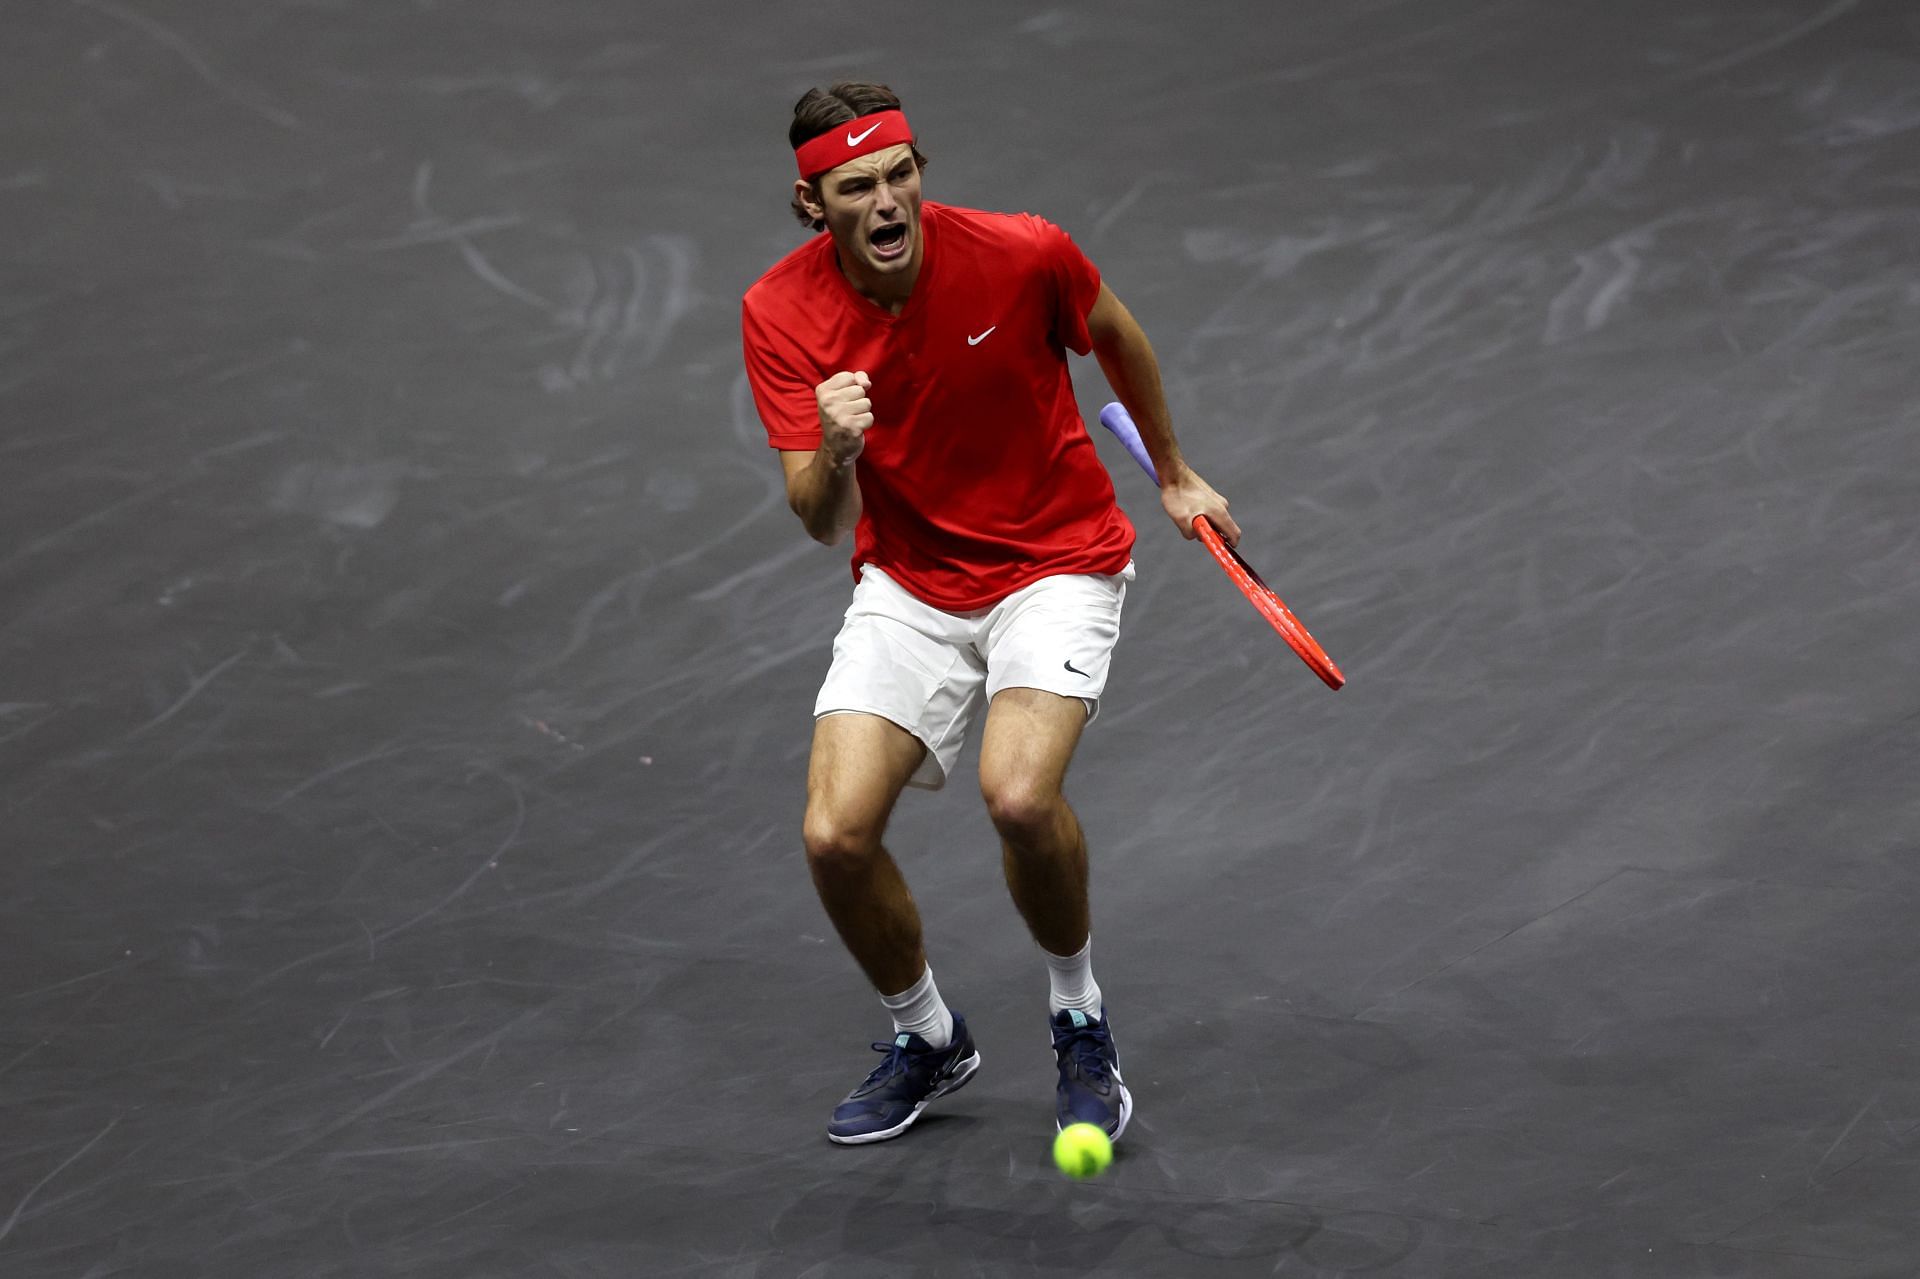 Taylor Fritz in action at the Laver Cup 2022 - Day Two